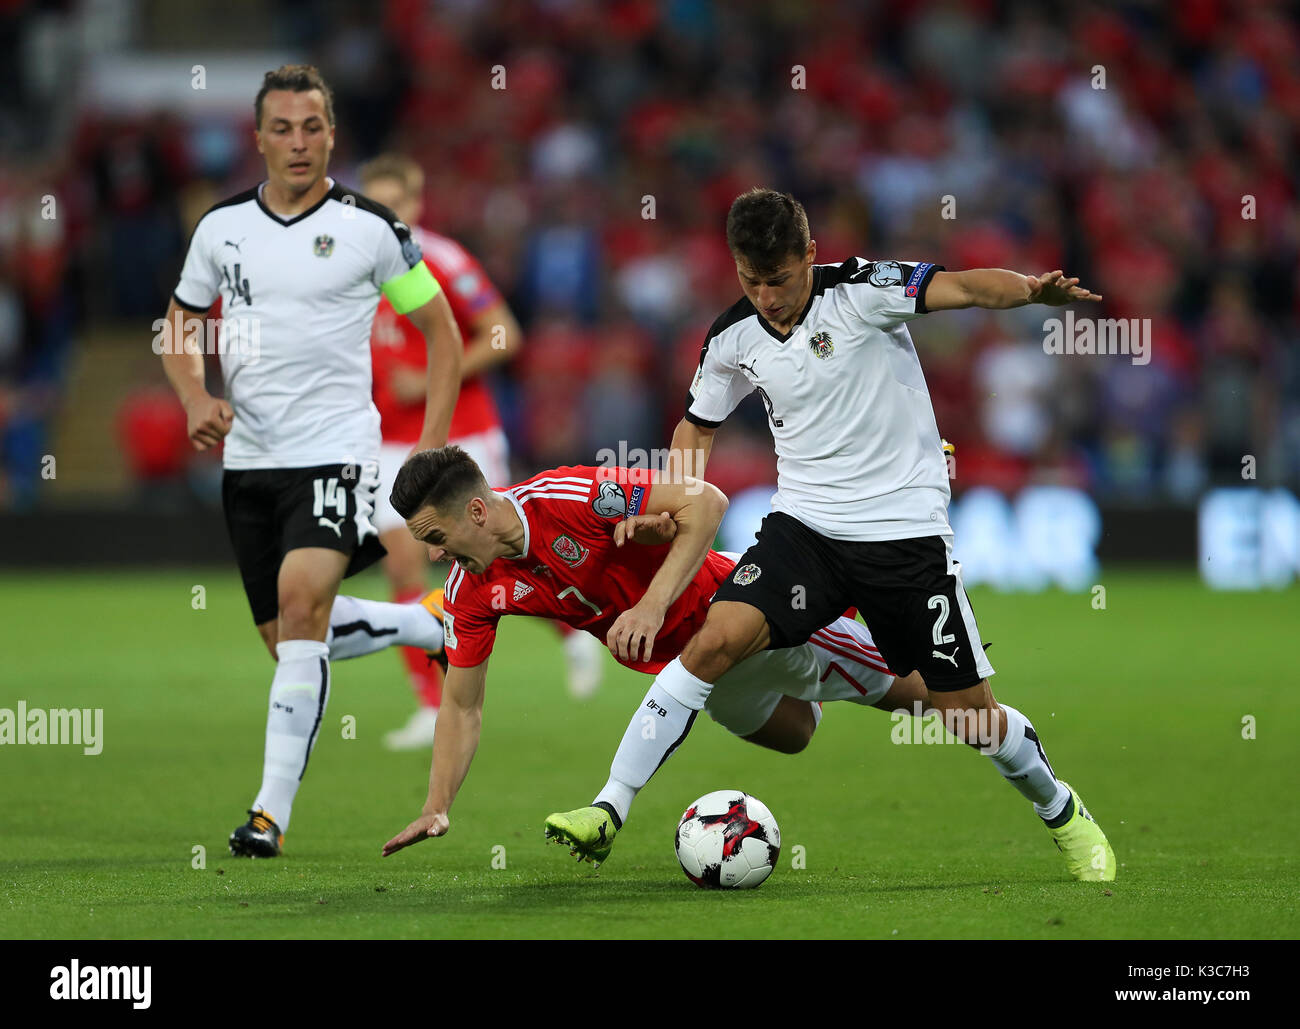 Wales' Tom Lawrence (cente) in action with Austria's Stefan Lainer during the 2018 FIFA World Cup Qualifying, Group D match at the Cardiff City Stadium. Stock Photo